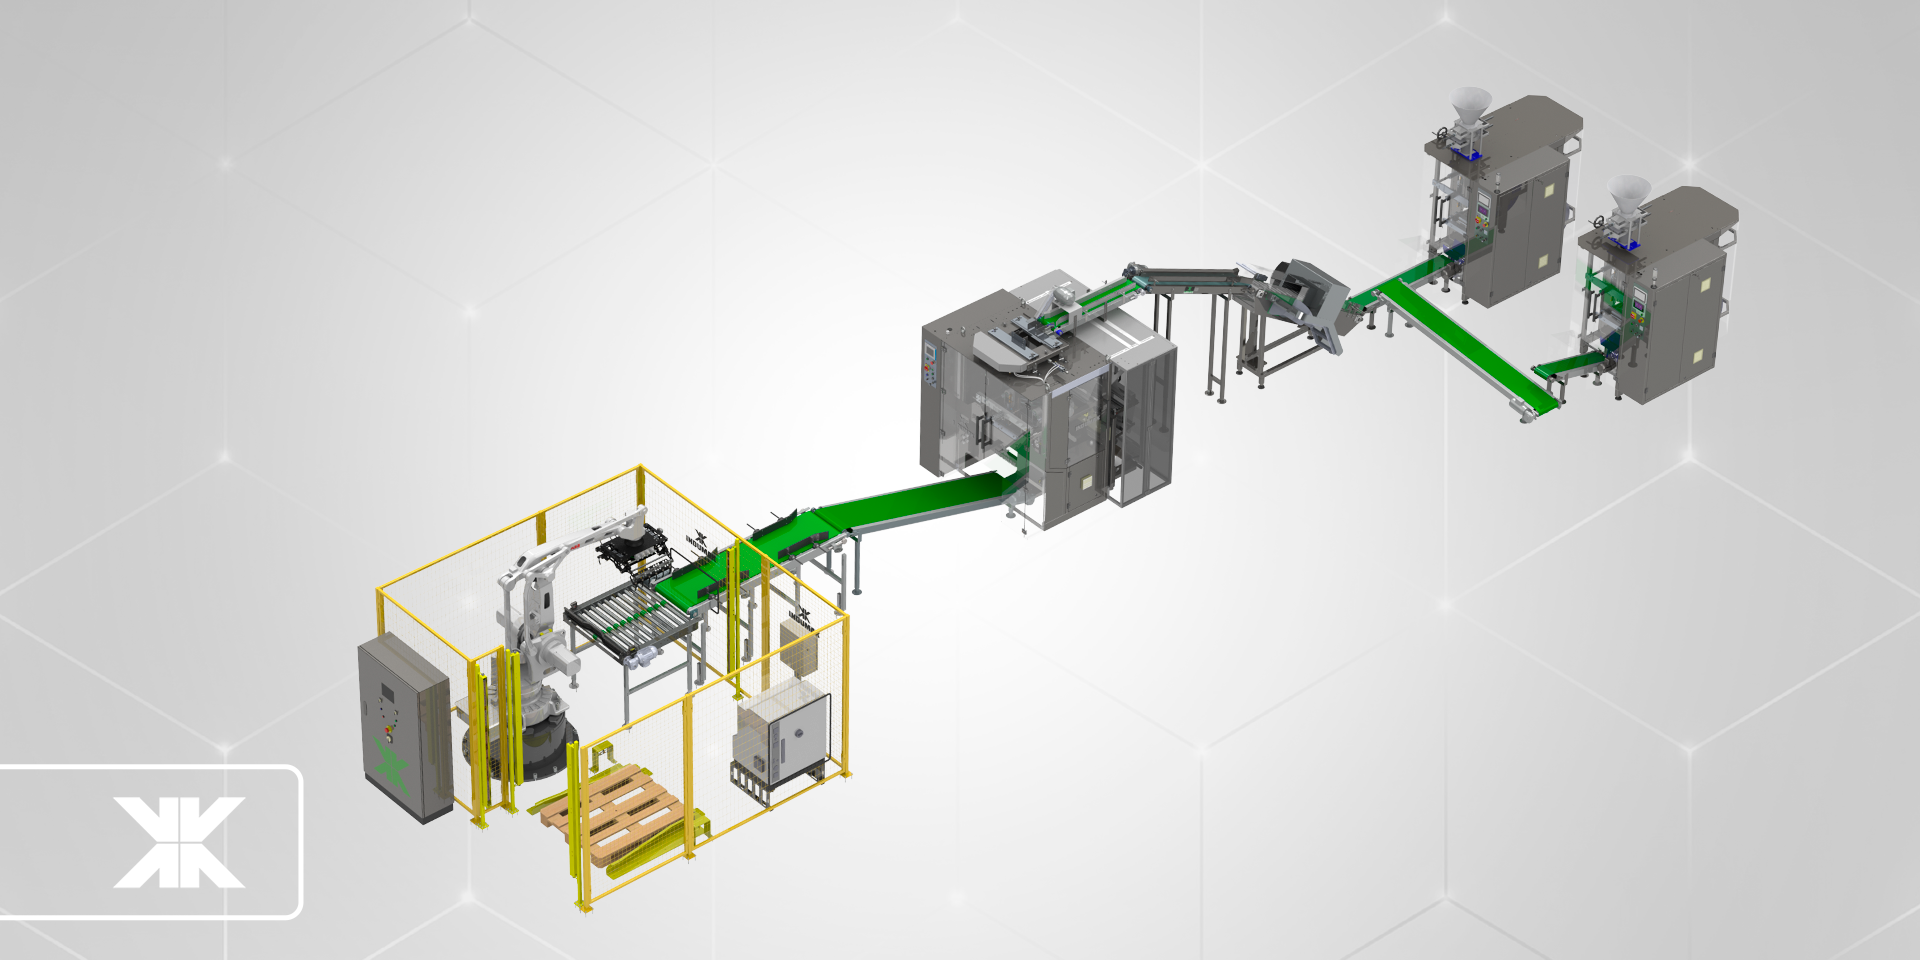 Operation of the palletizing system